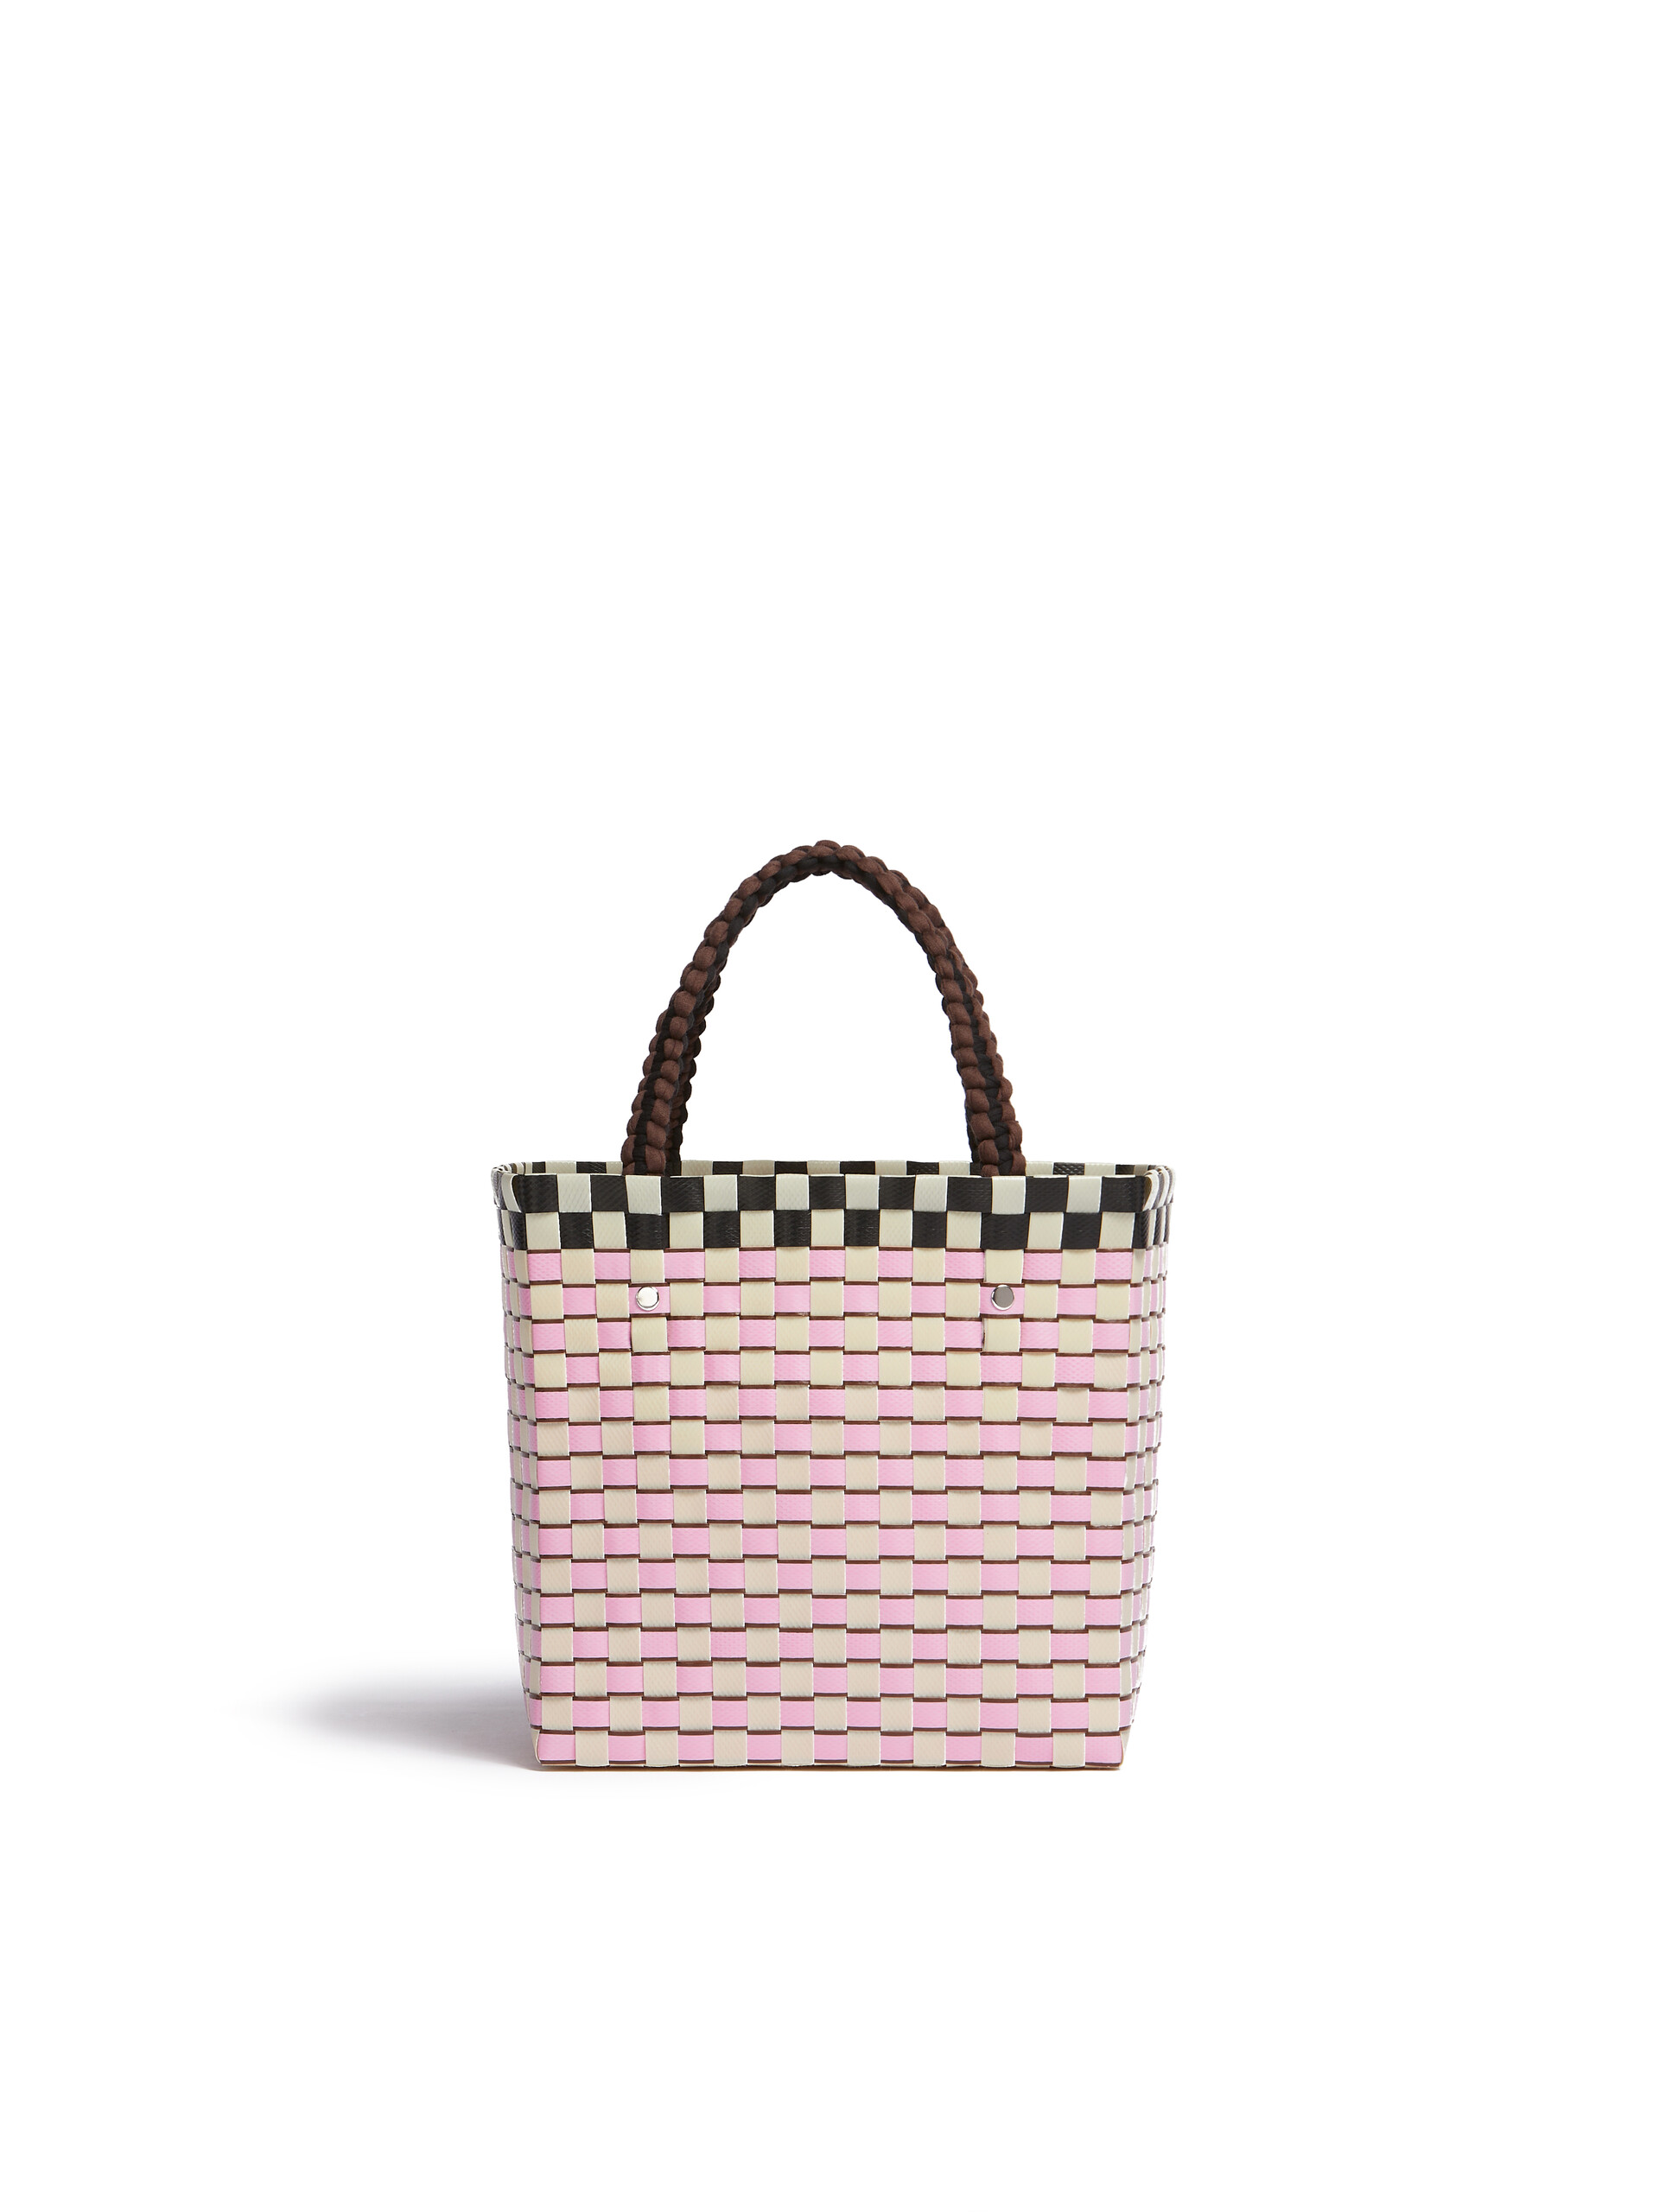 MARNI MARKET BASKET bag in light blue square woven material - Bags - Image 3